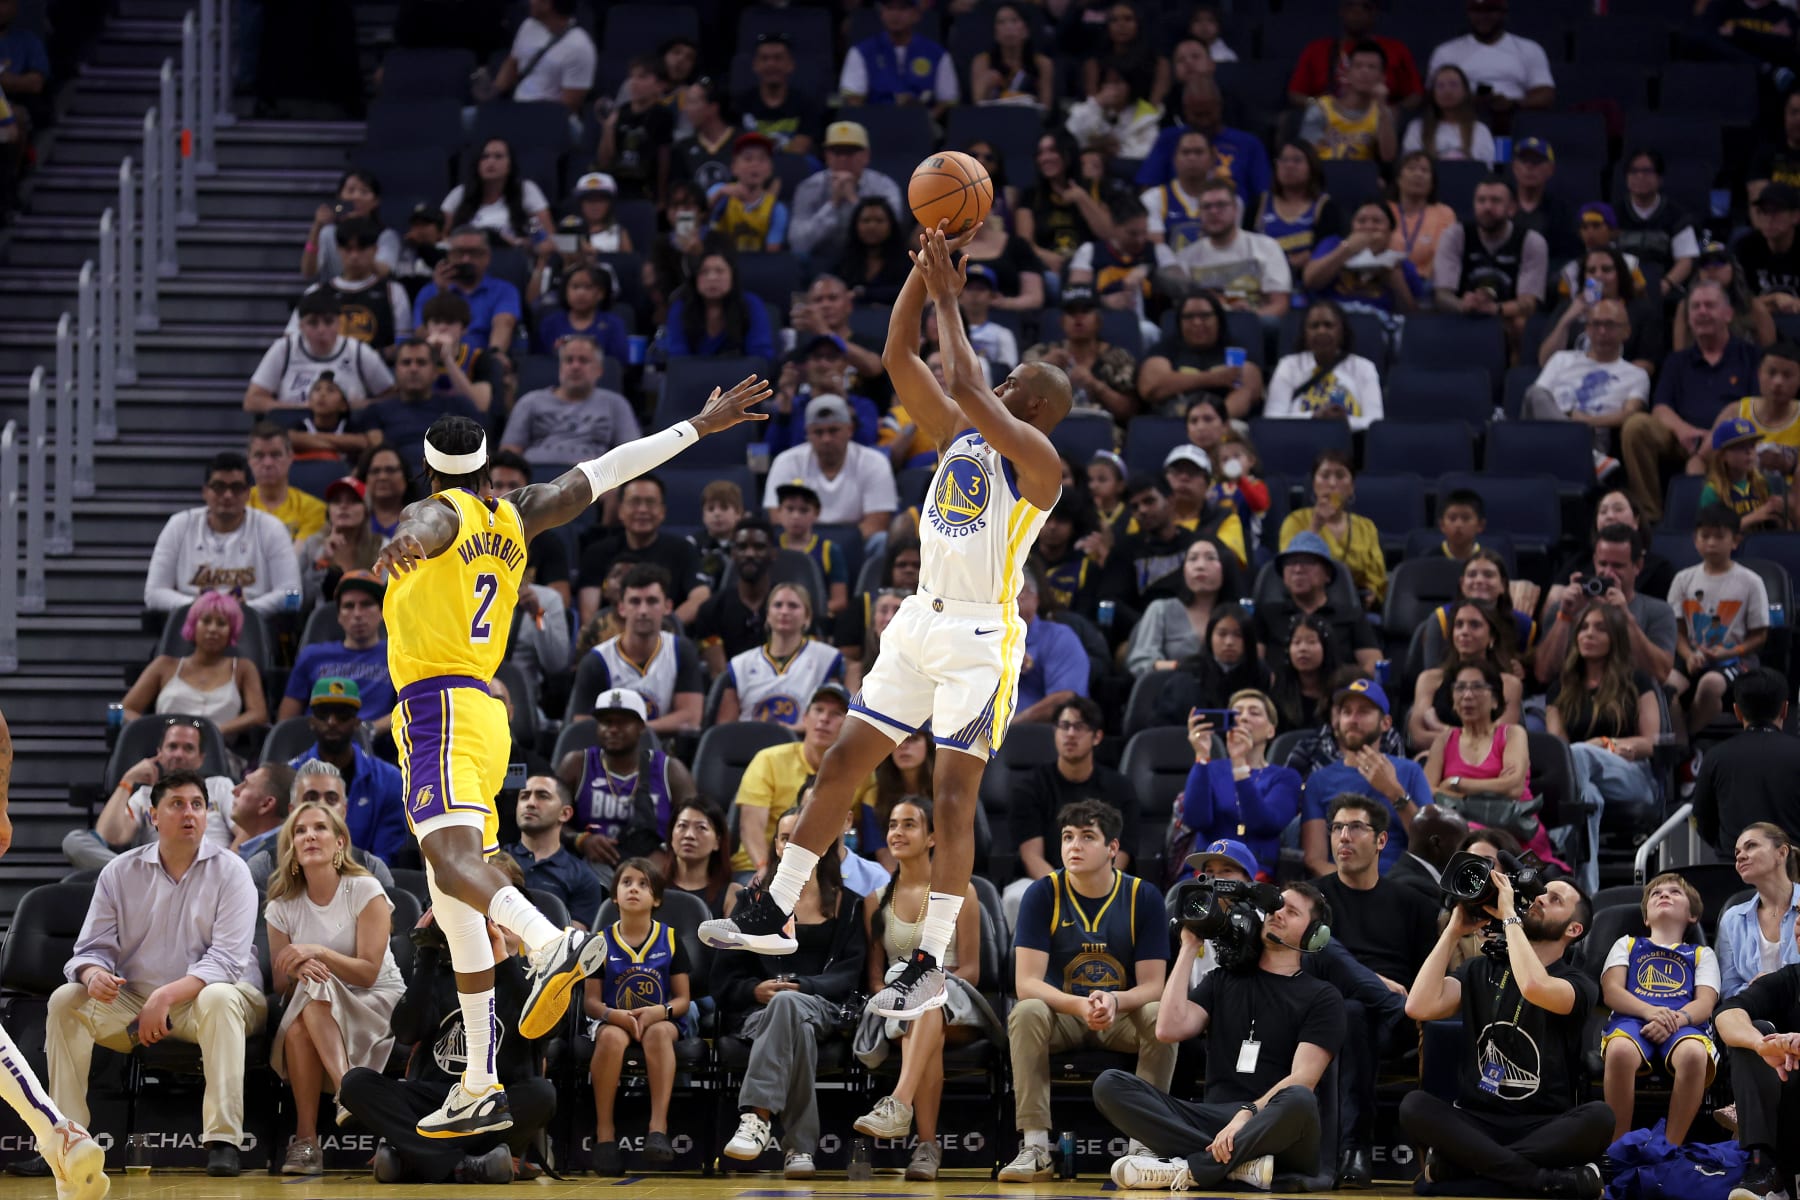 Chris Paul looks in sync with Warriors in early preseason win over